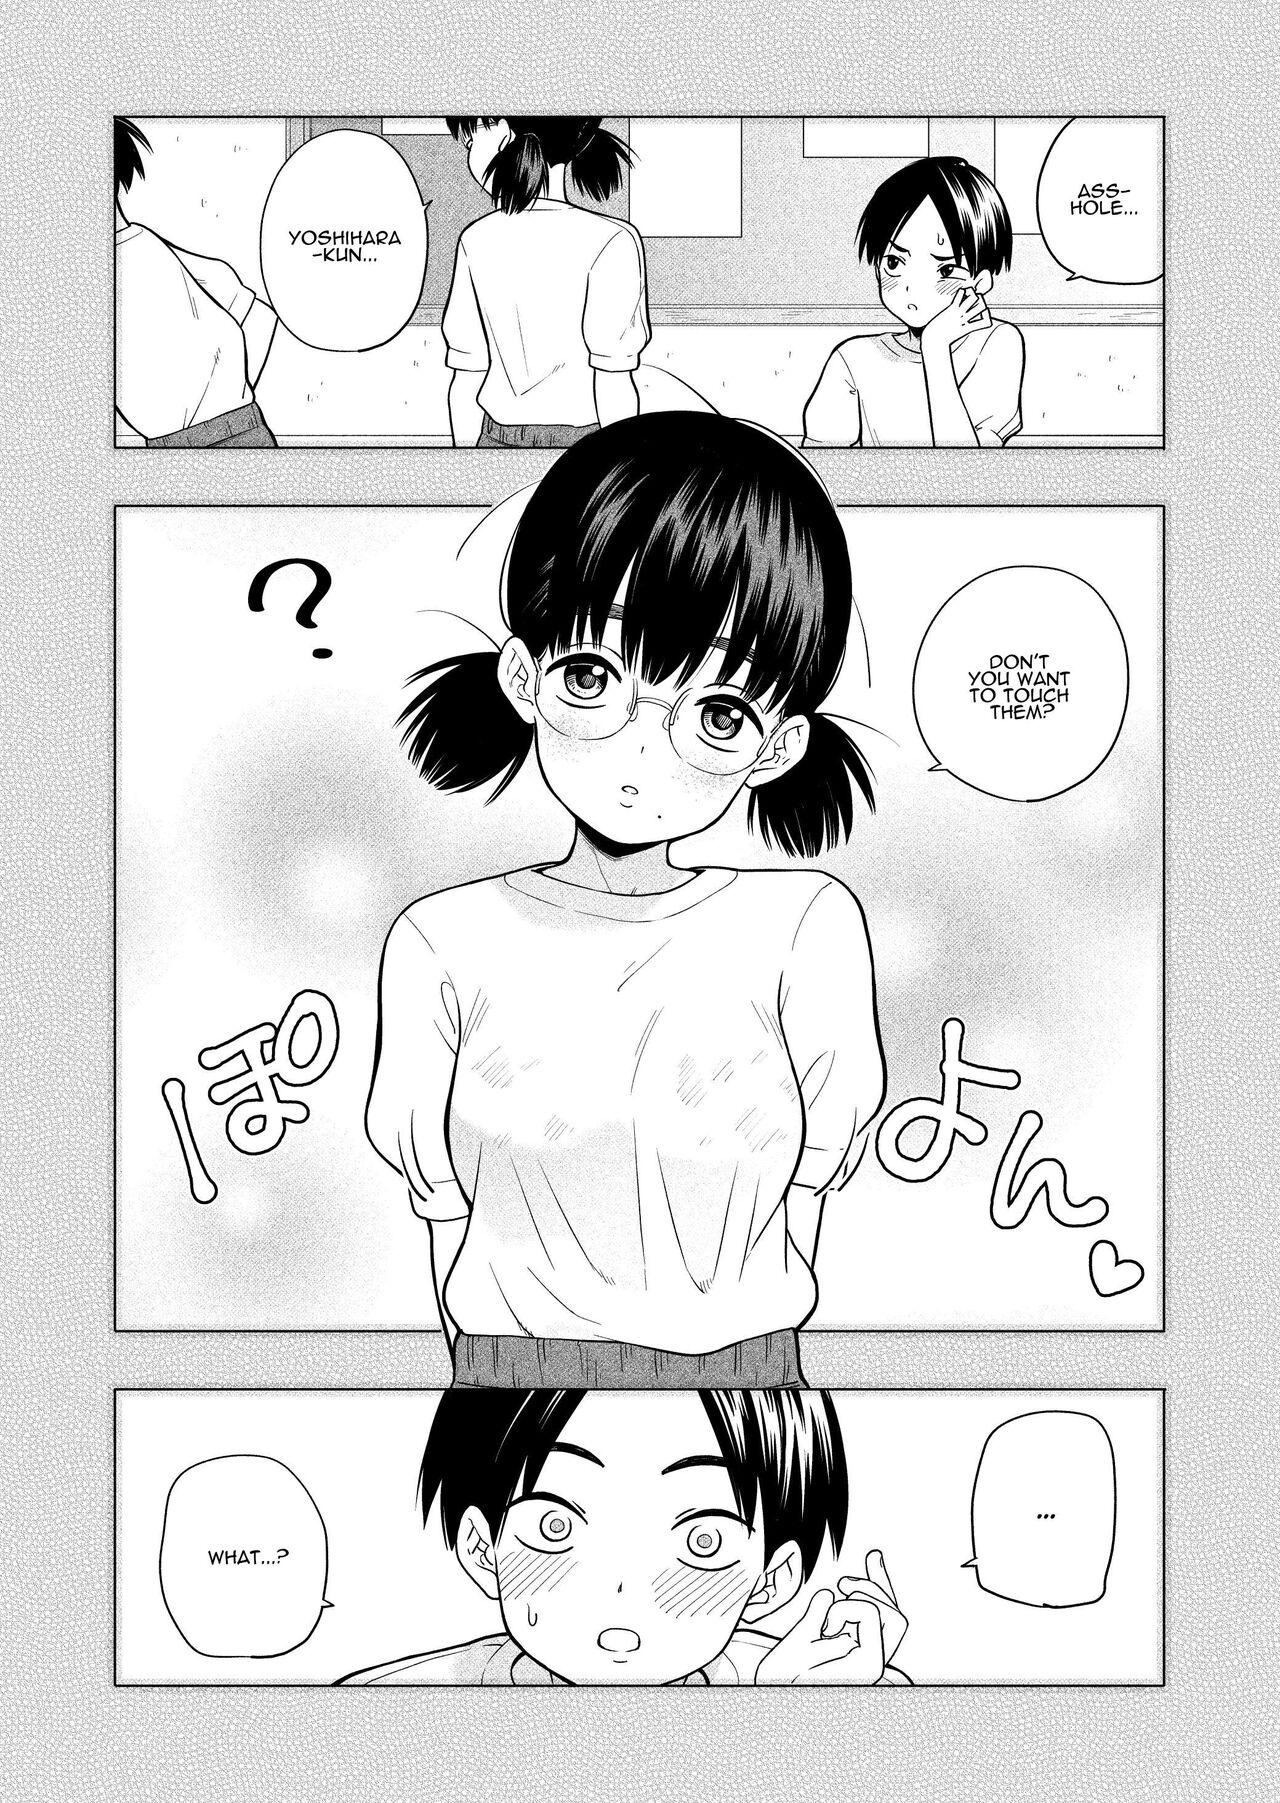 Hot Sluts Hoshikute, Motomete. | I want, and I yearn for. - Original Rough Sex - Page 3